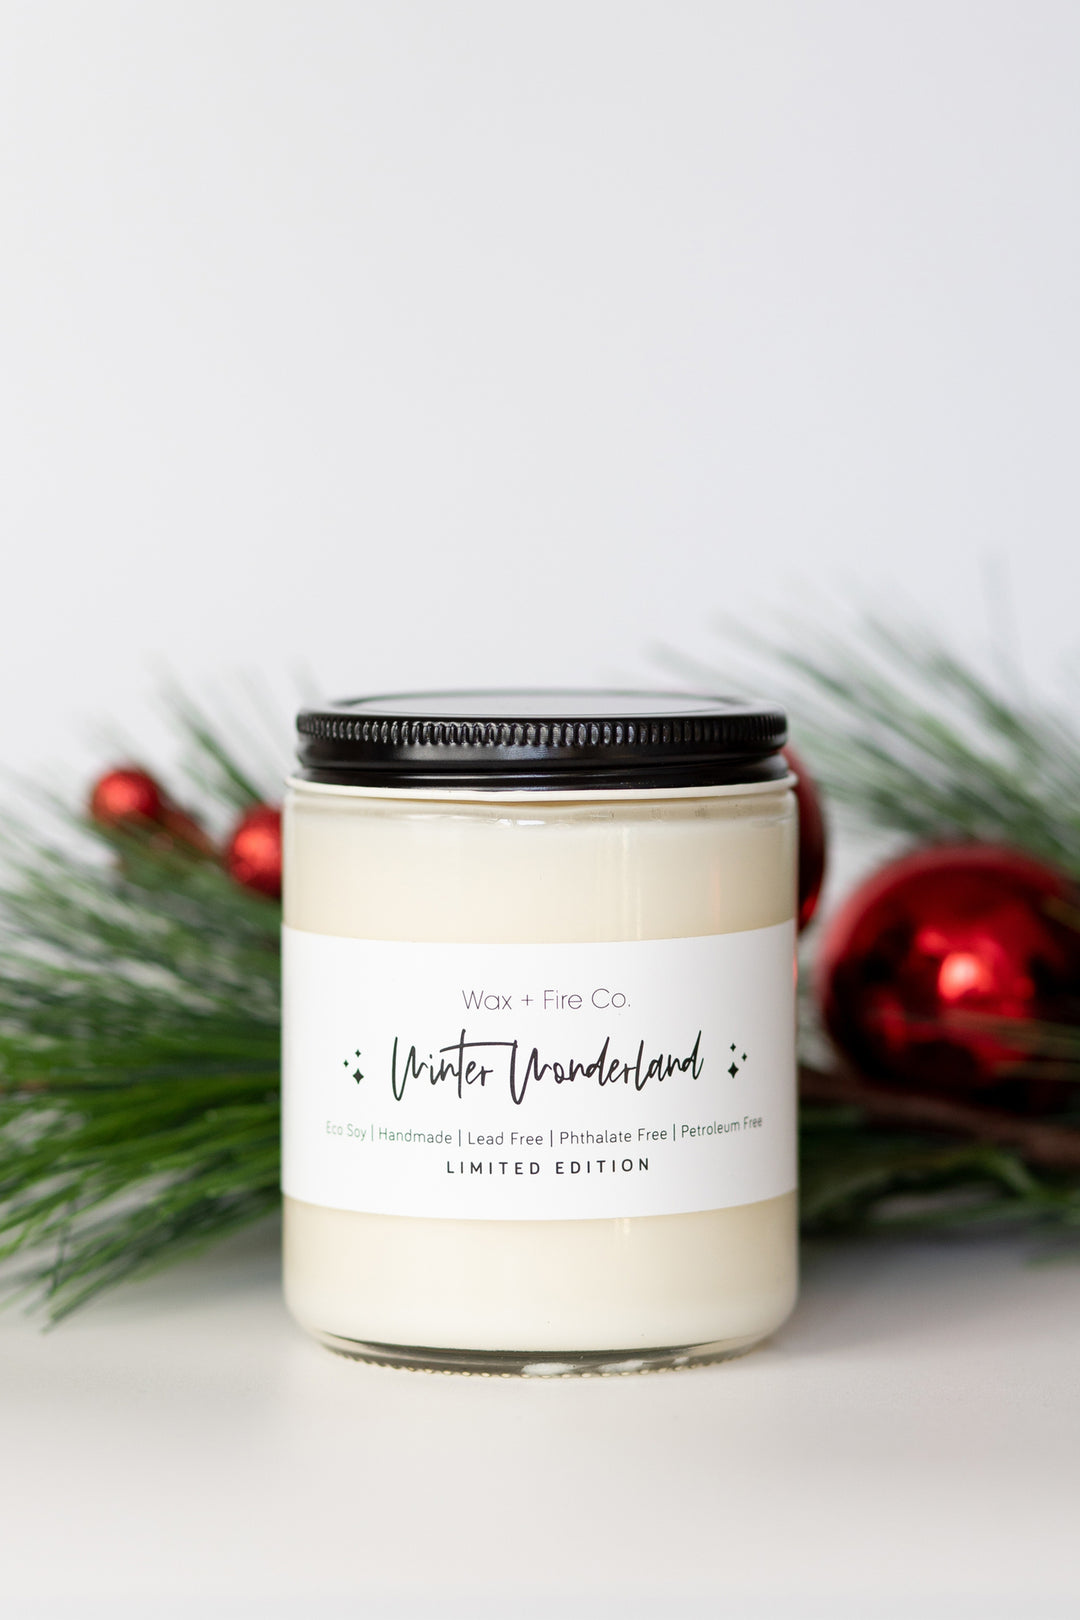 Wax + Fire Co soy holiday limited edition handmade vegan candles for fall and winter - winter wonderland